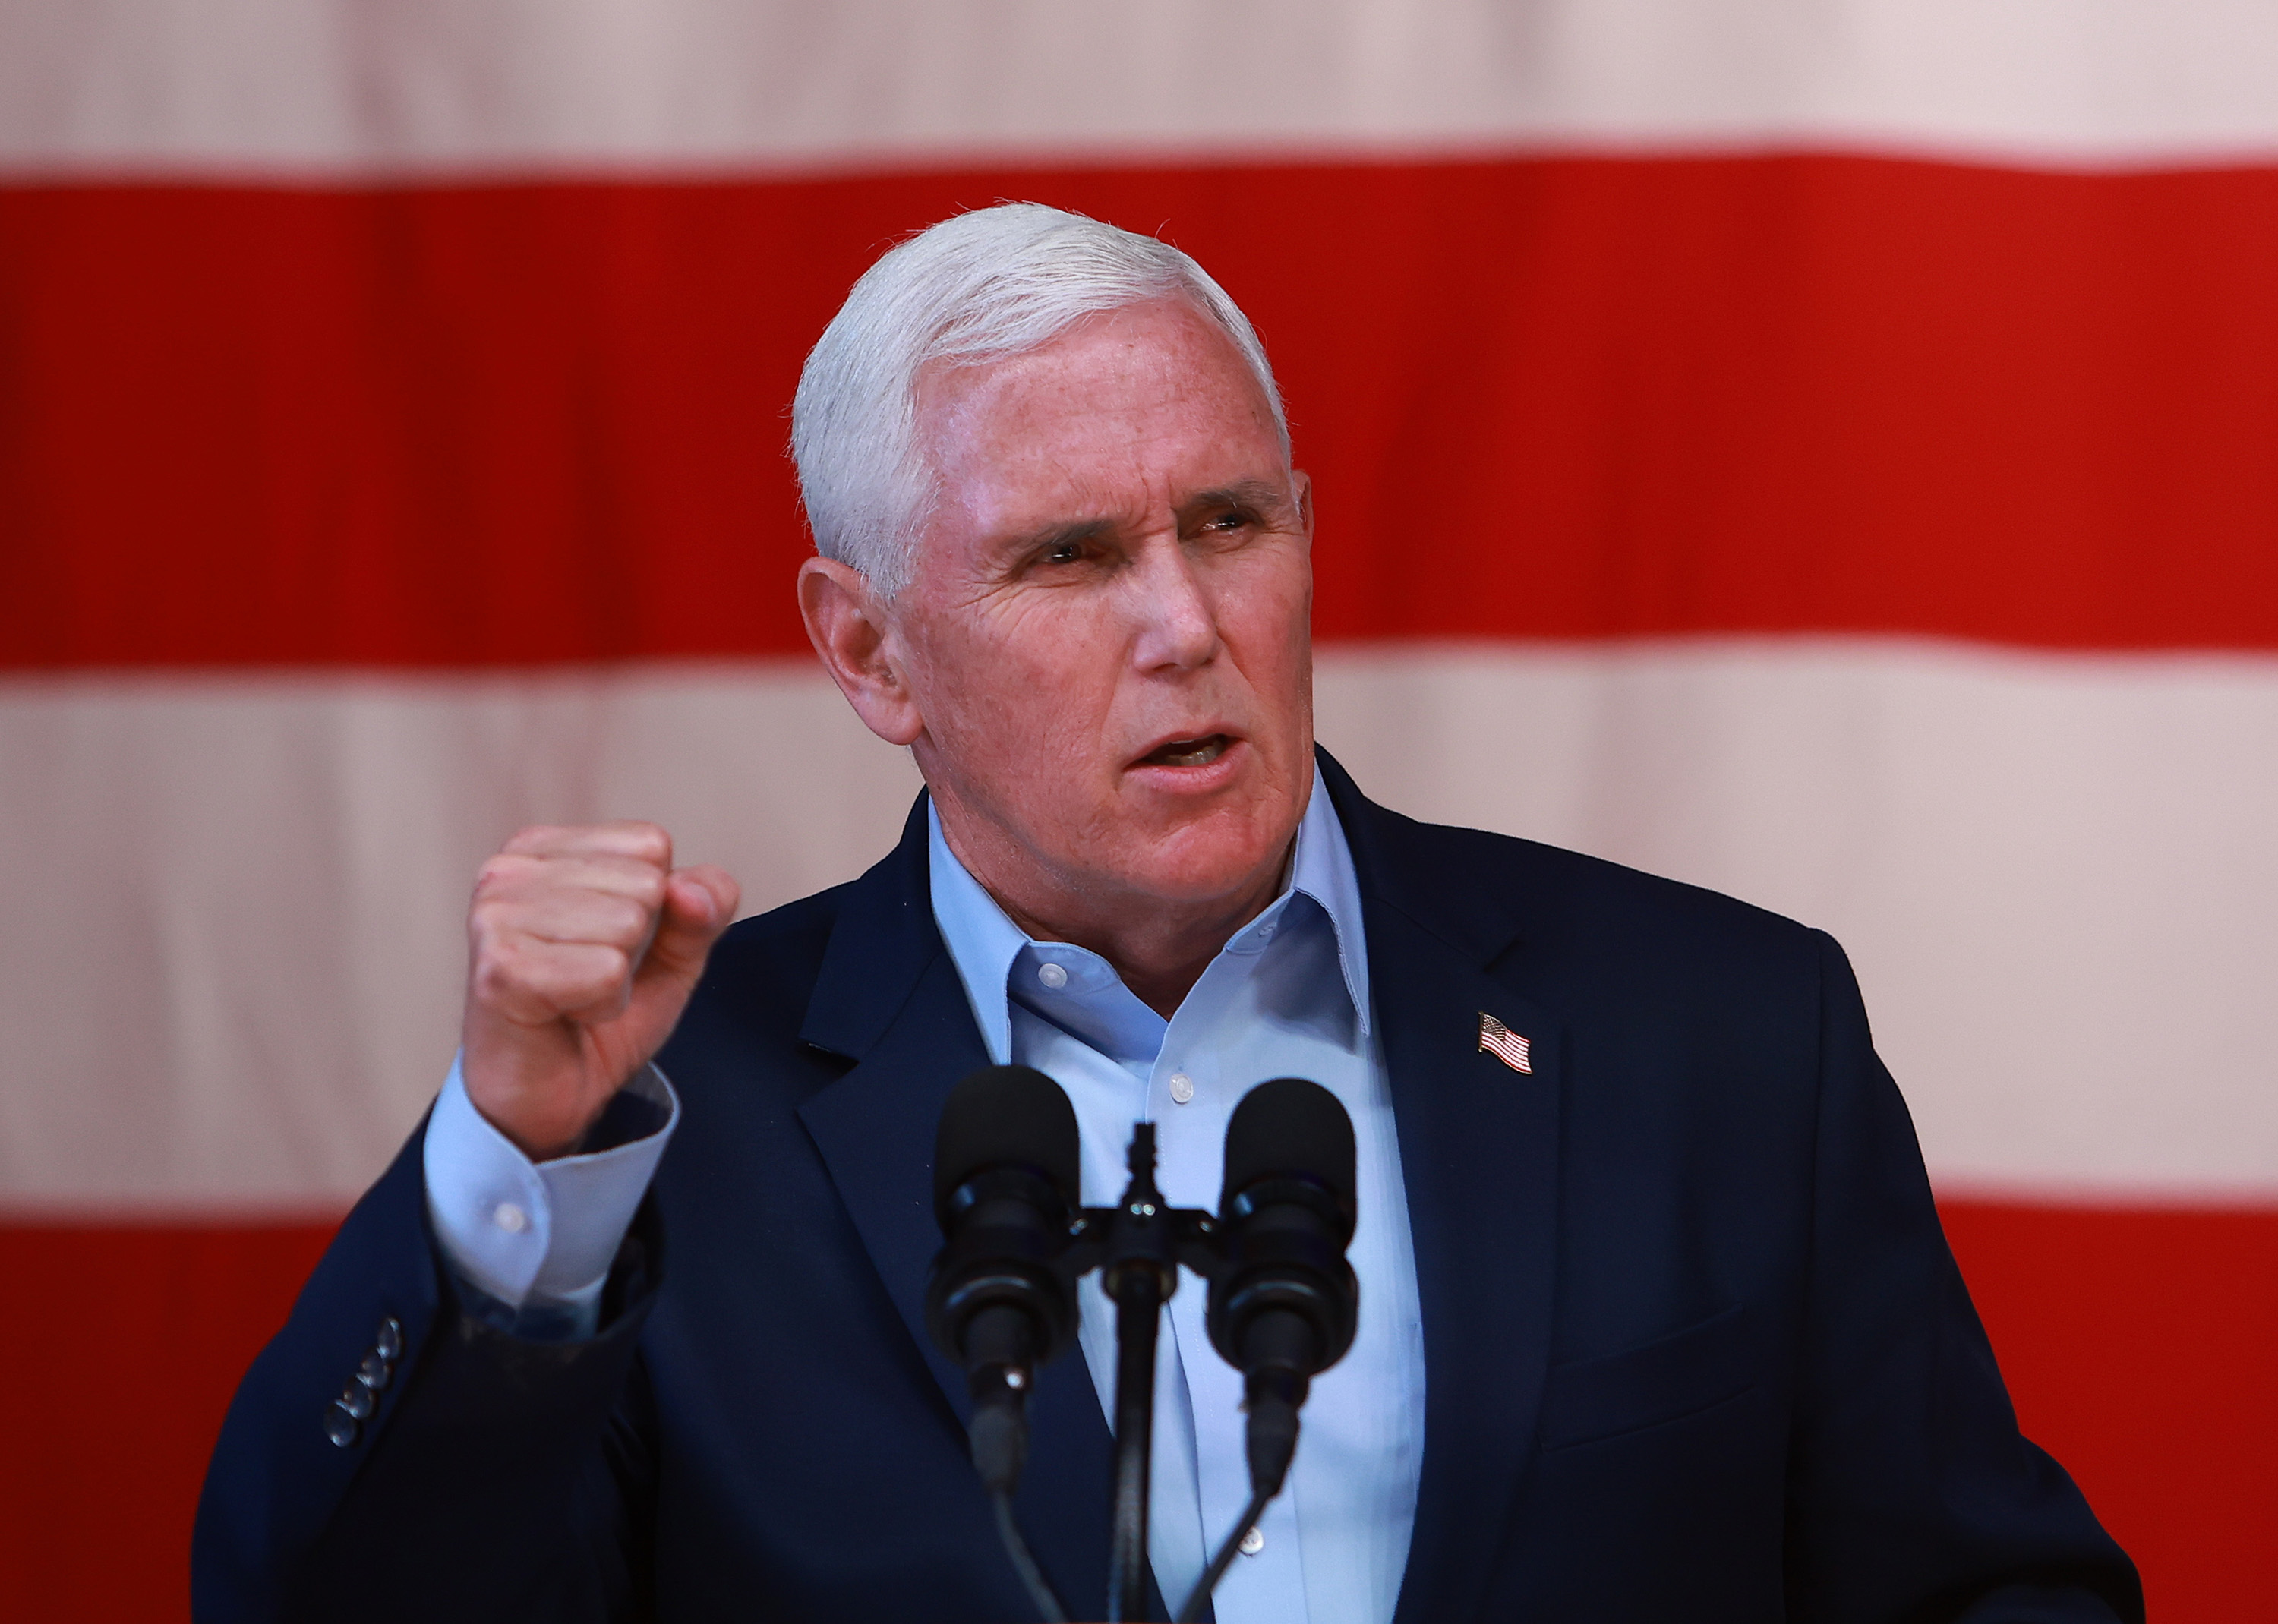 Mike Pence's Chances of Beating Donald Trump in 2024, According to Polls